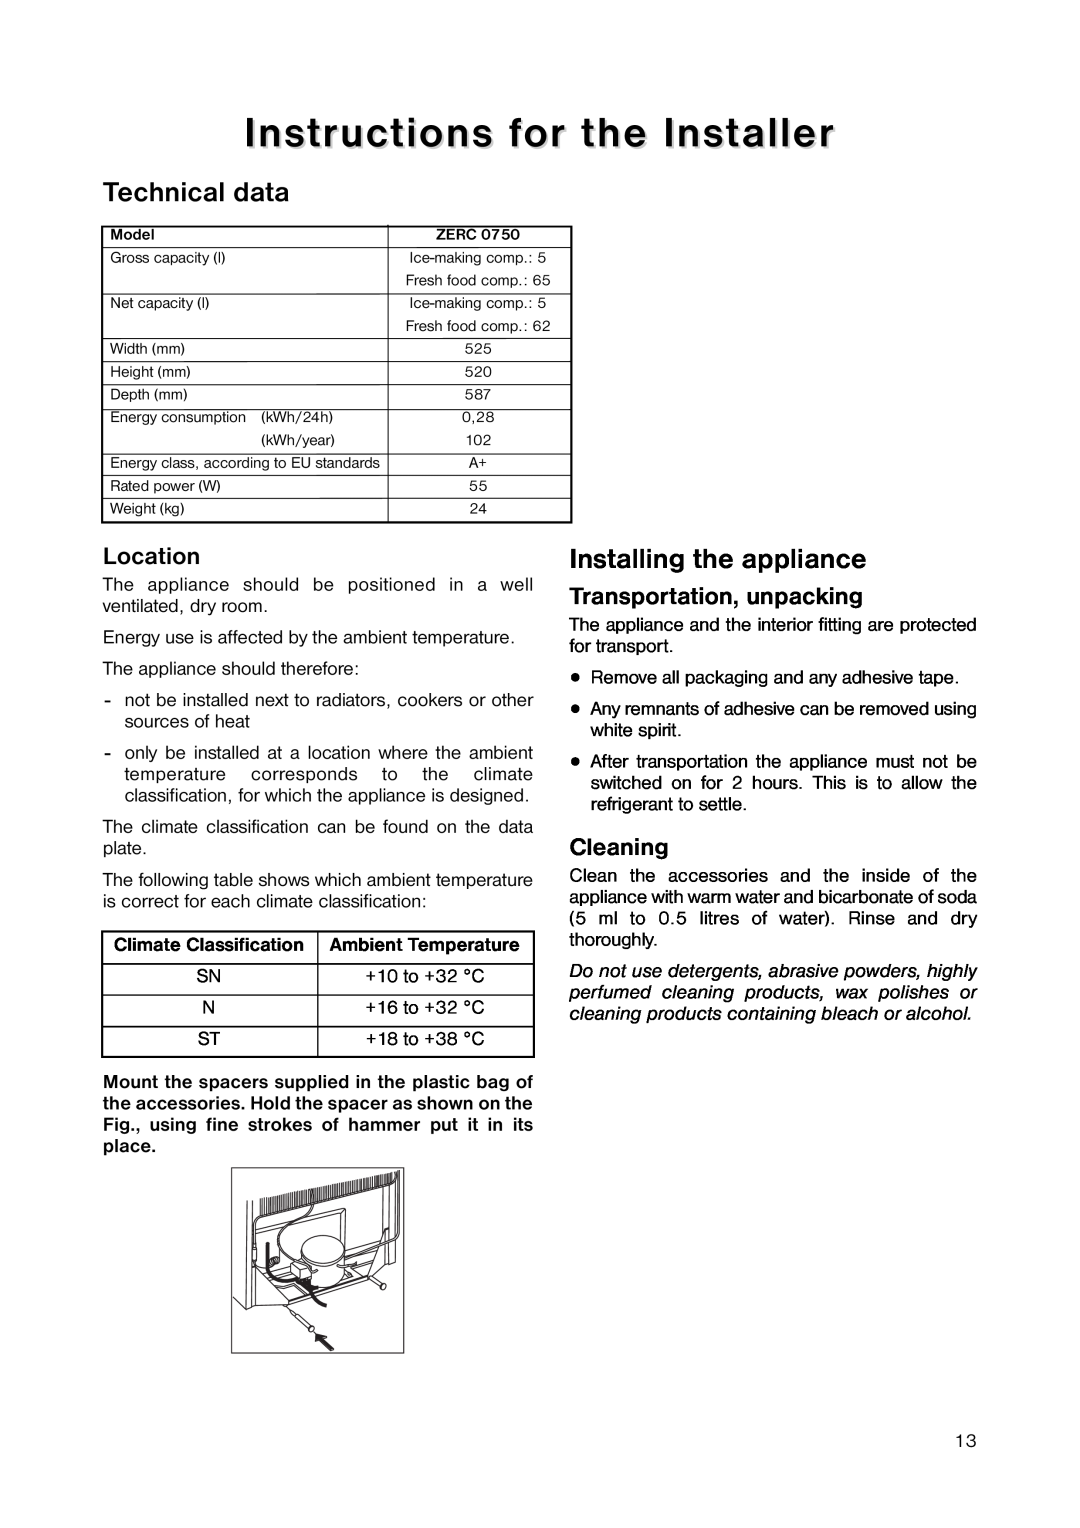 Zanussi ZERC 0750 manual Instructions for the Installer, Installing the appliance, Transportation, unpacking, Cleaning 